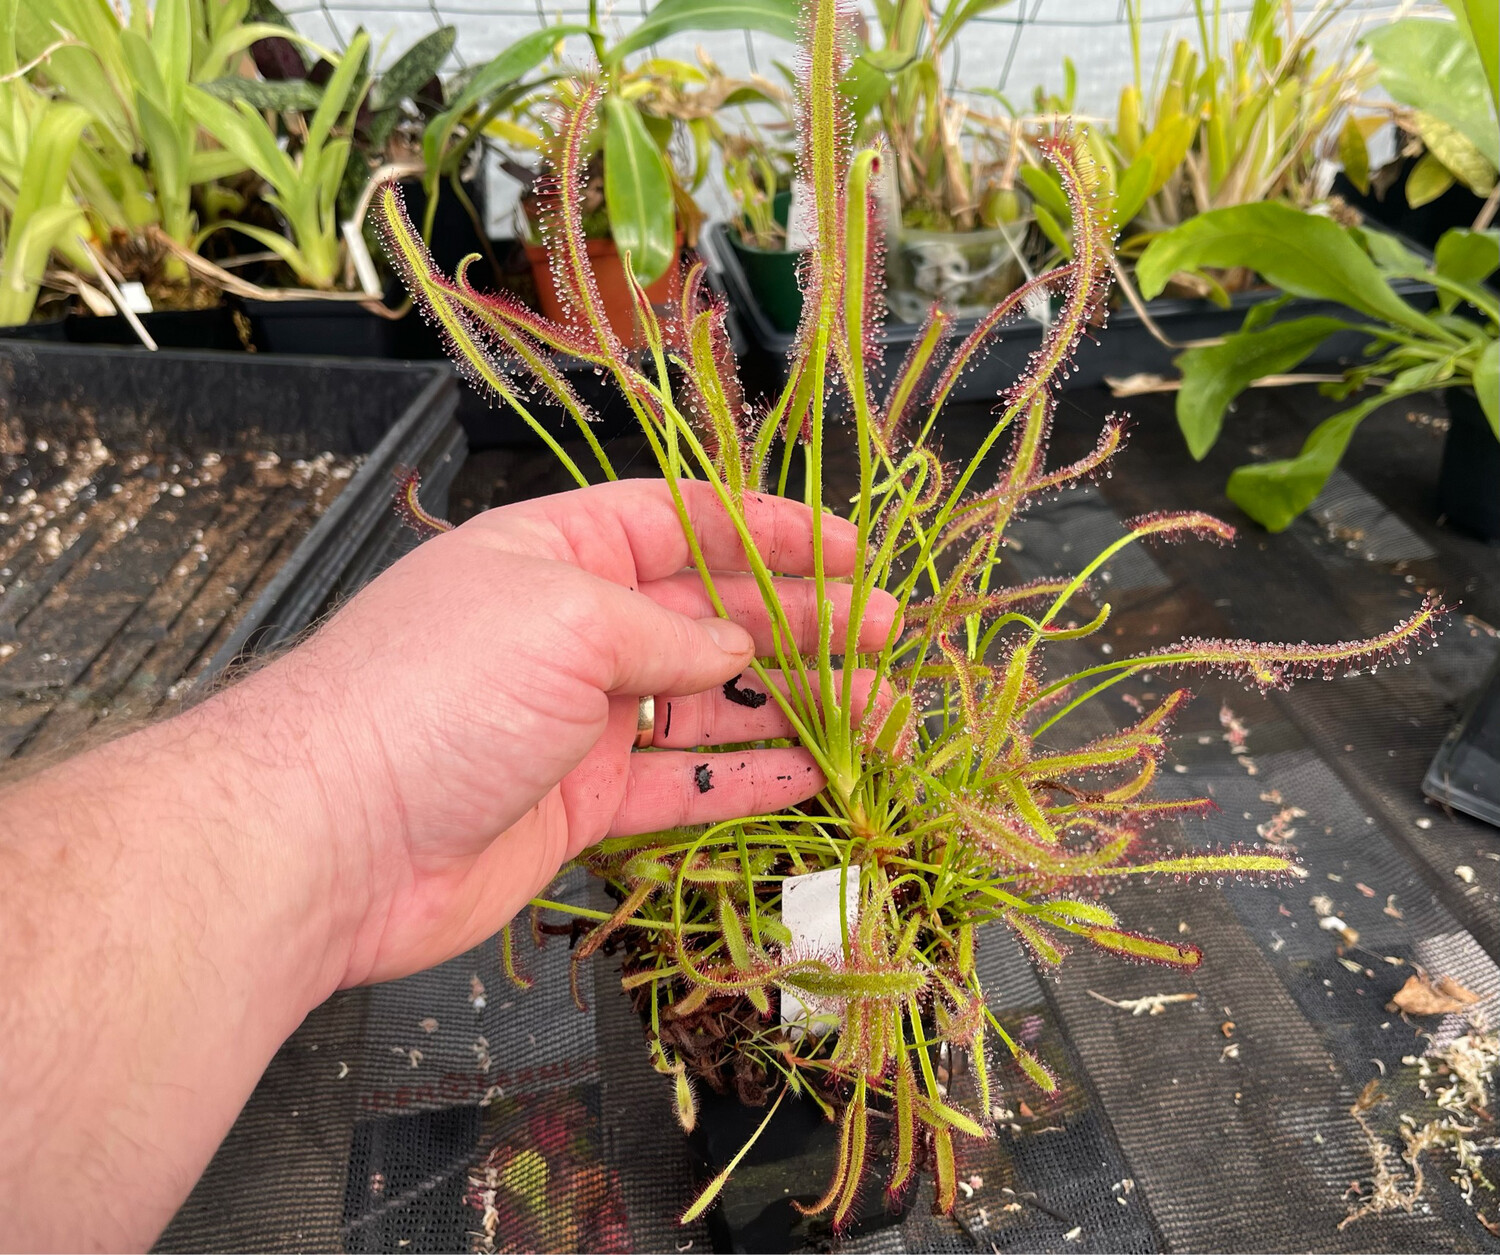 Drosera capensis "Hairy" Cape Sundew - Big Plants! Buy one get one 1/2 price!